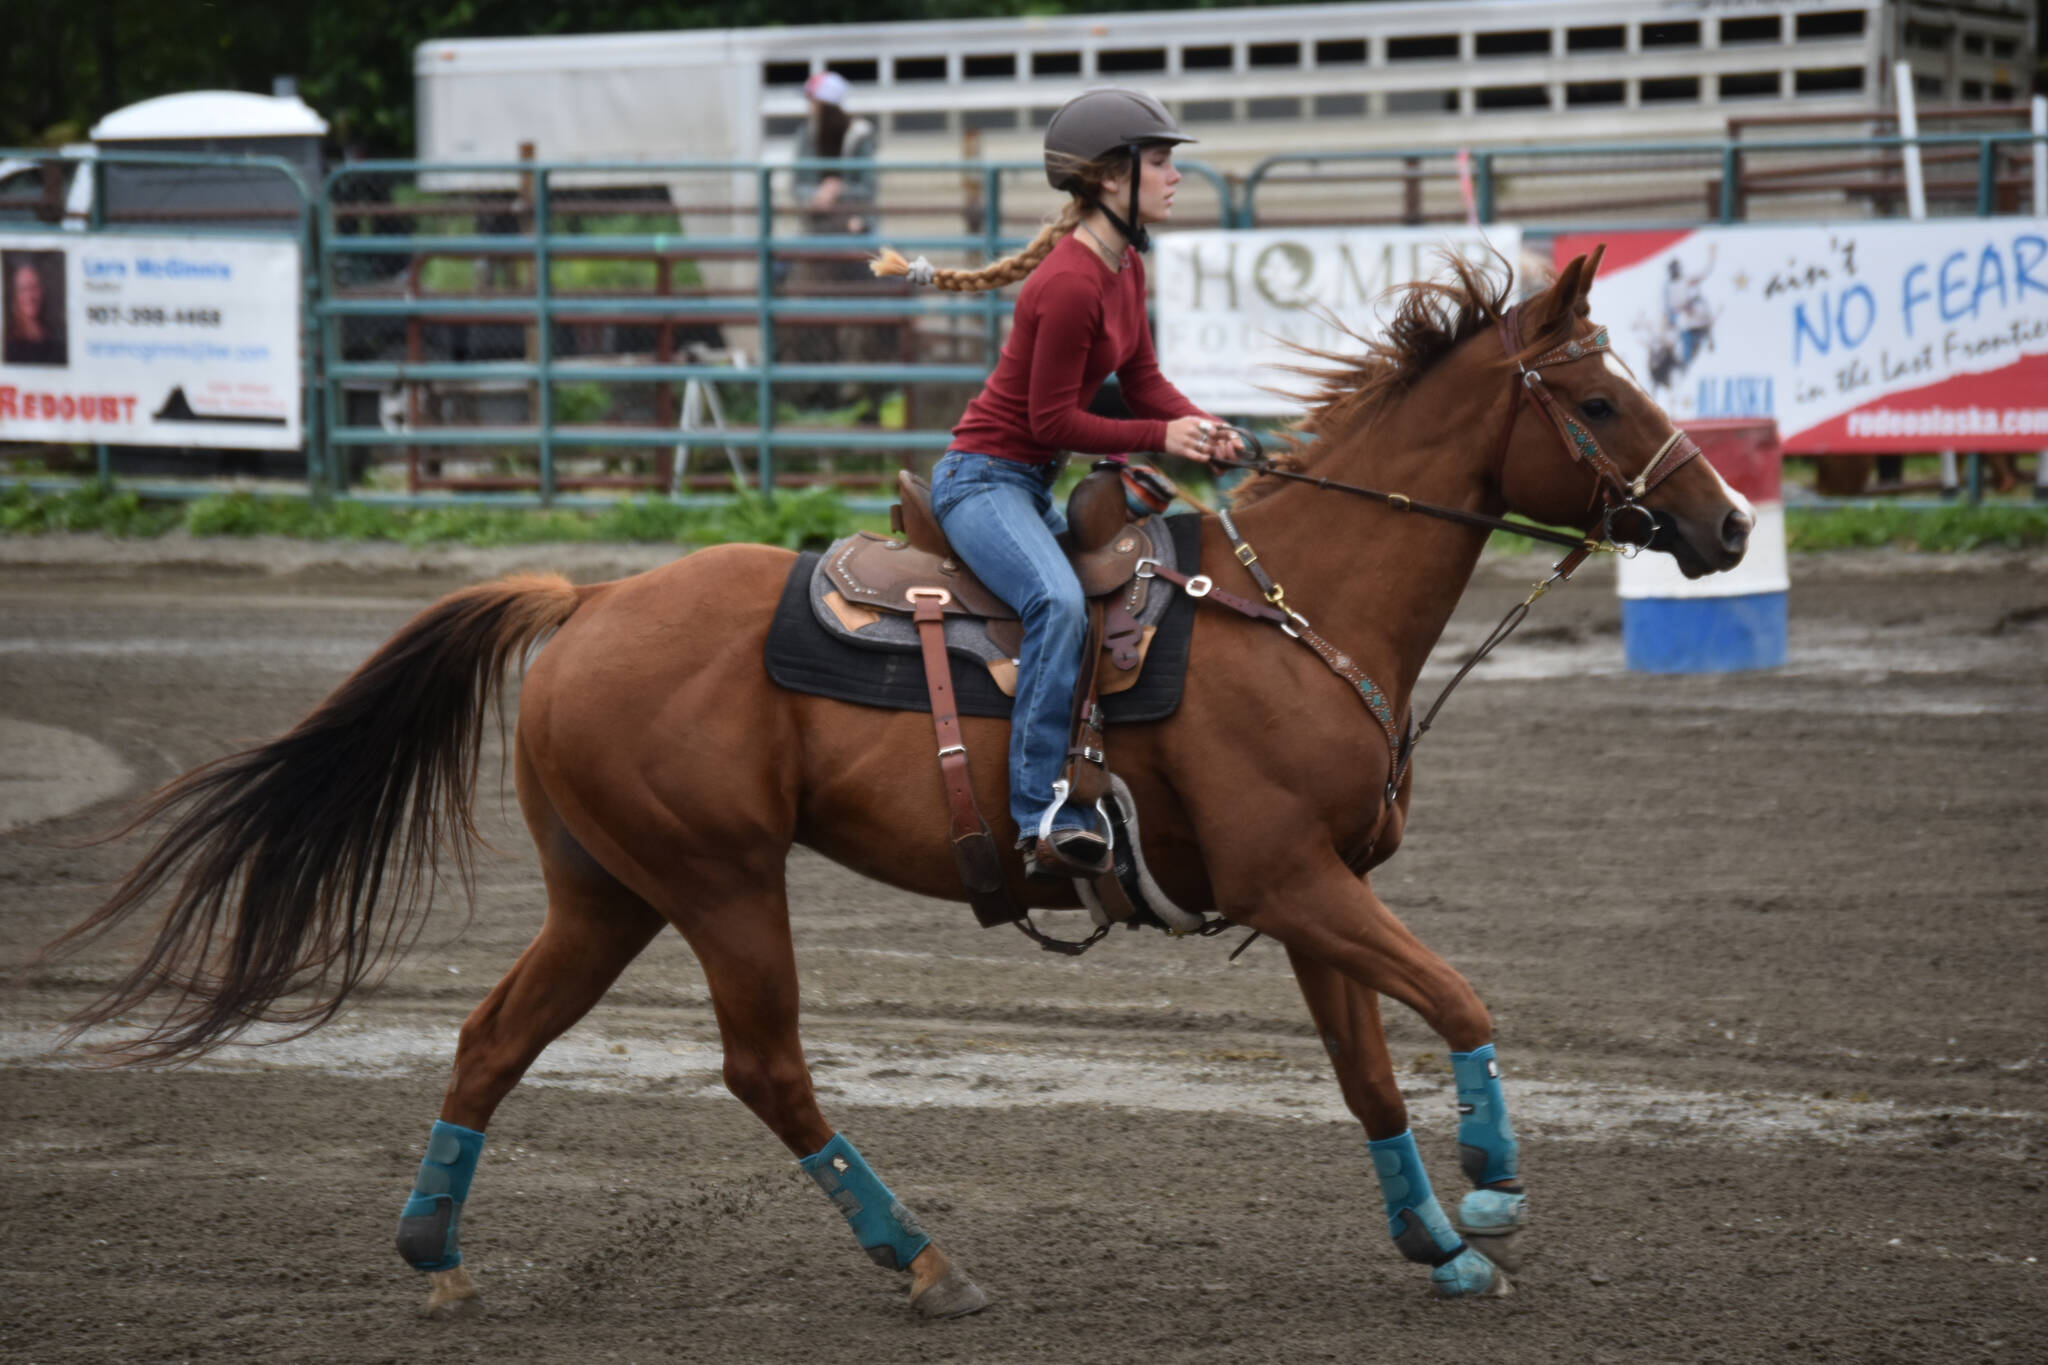 Evelyn Cooley competes in the barrel race at the Kenai Peninsula Fair on Aug. 12, 2022, in Ninilchik, Alaska. (Jake Dye/Peninsula Clarion)